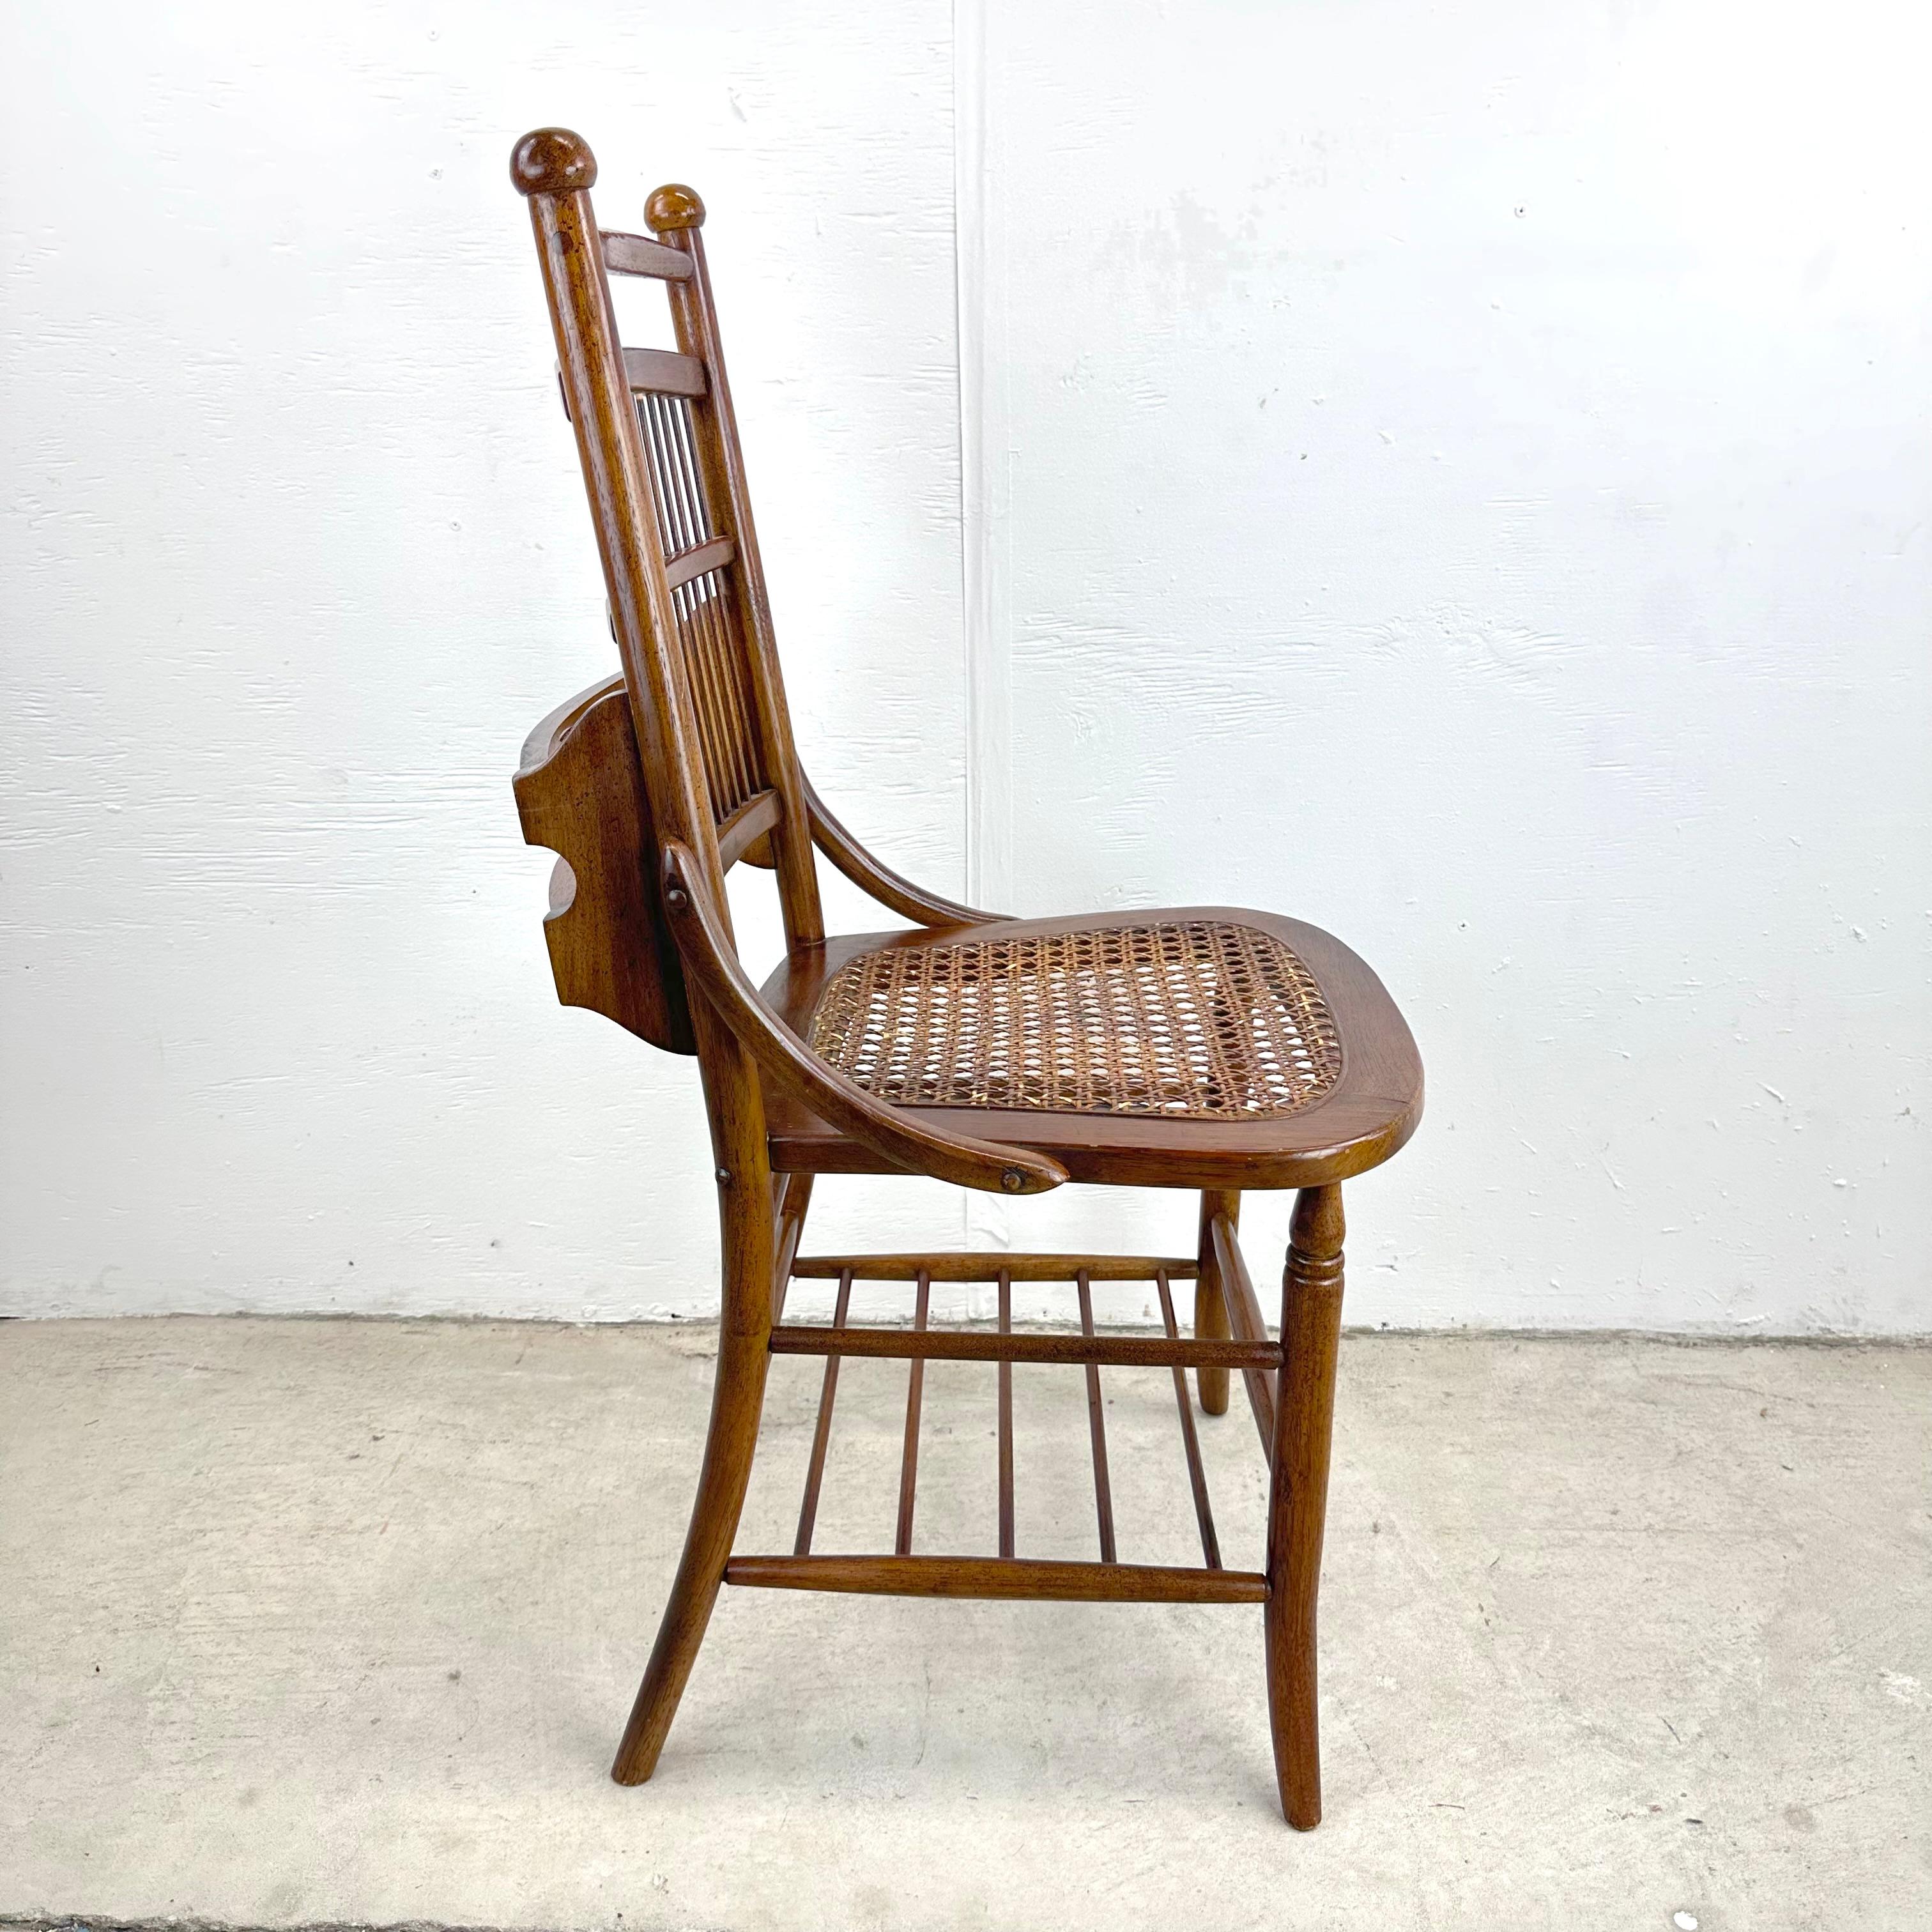 20th Century Antique Side Chair With Cane Seat and Spindle Back For Sale